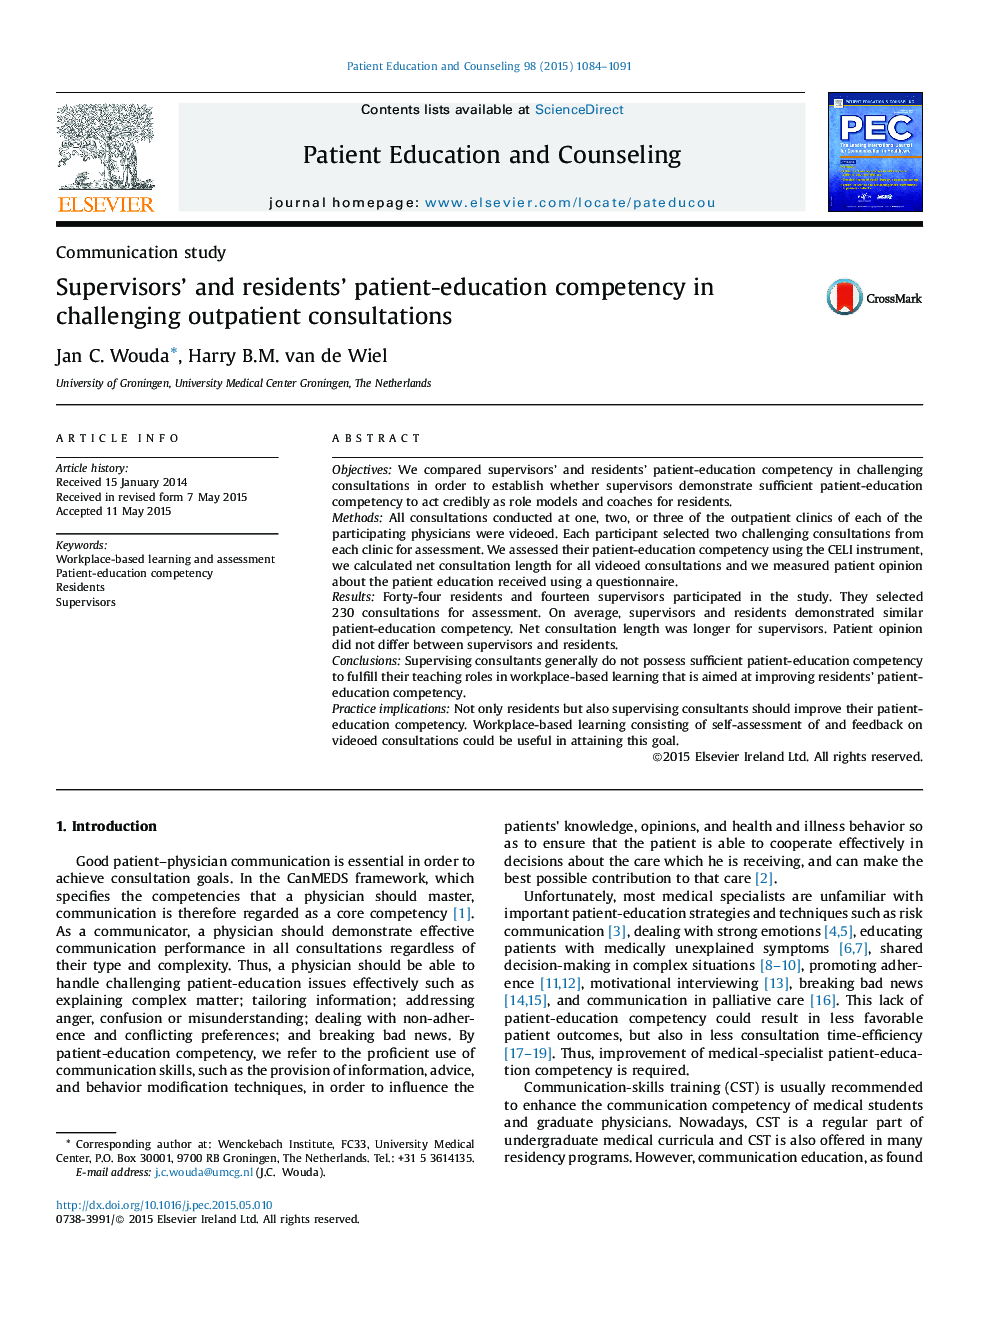 Supervisors’ and residents’ patient-education competency in challenging outpatient consultations